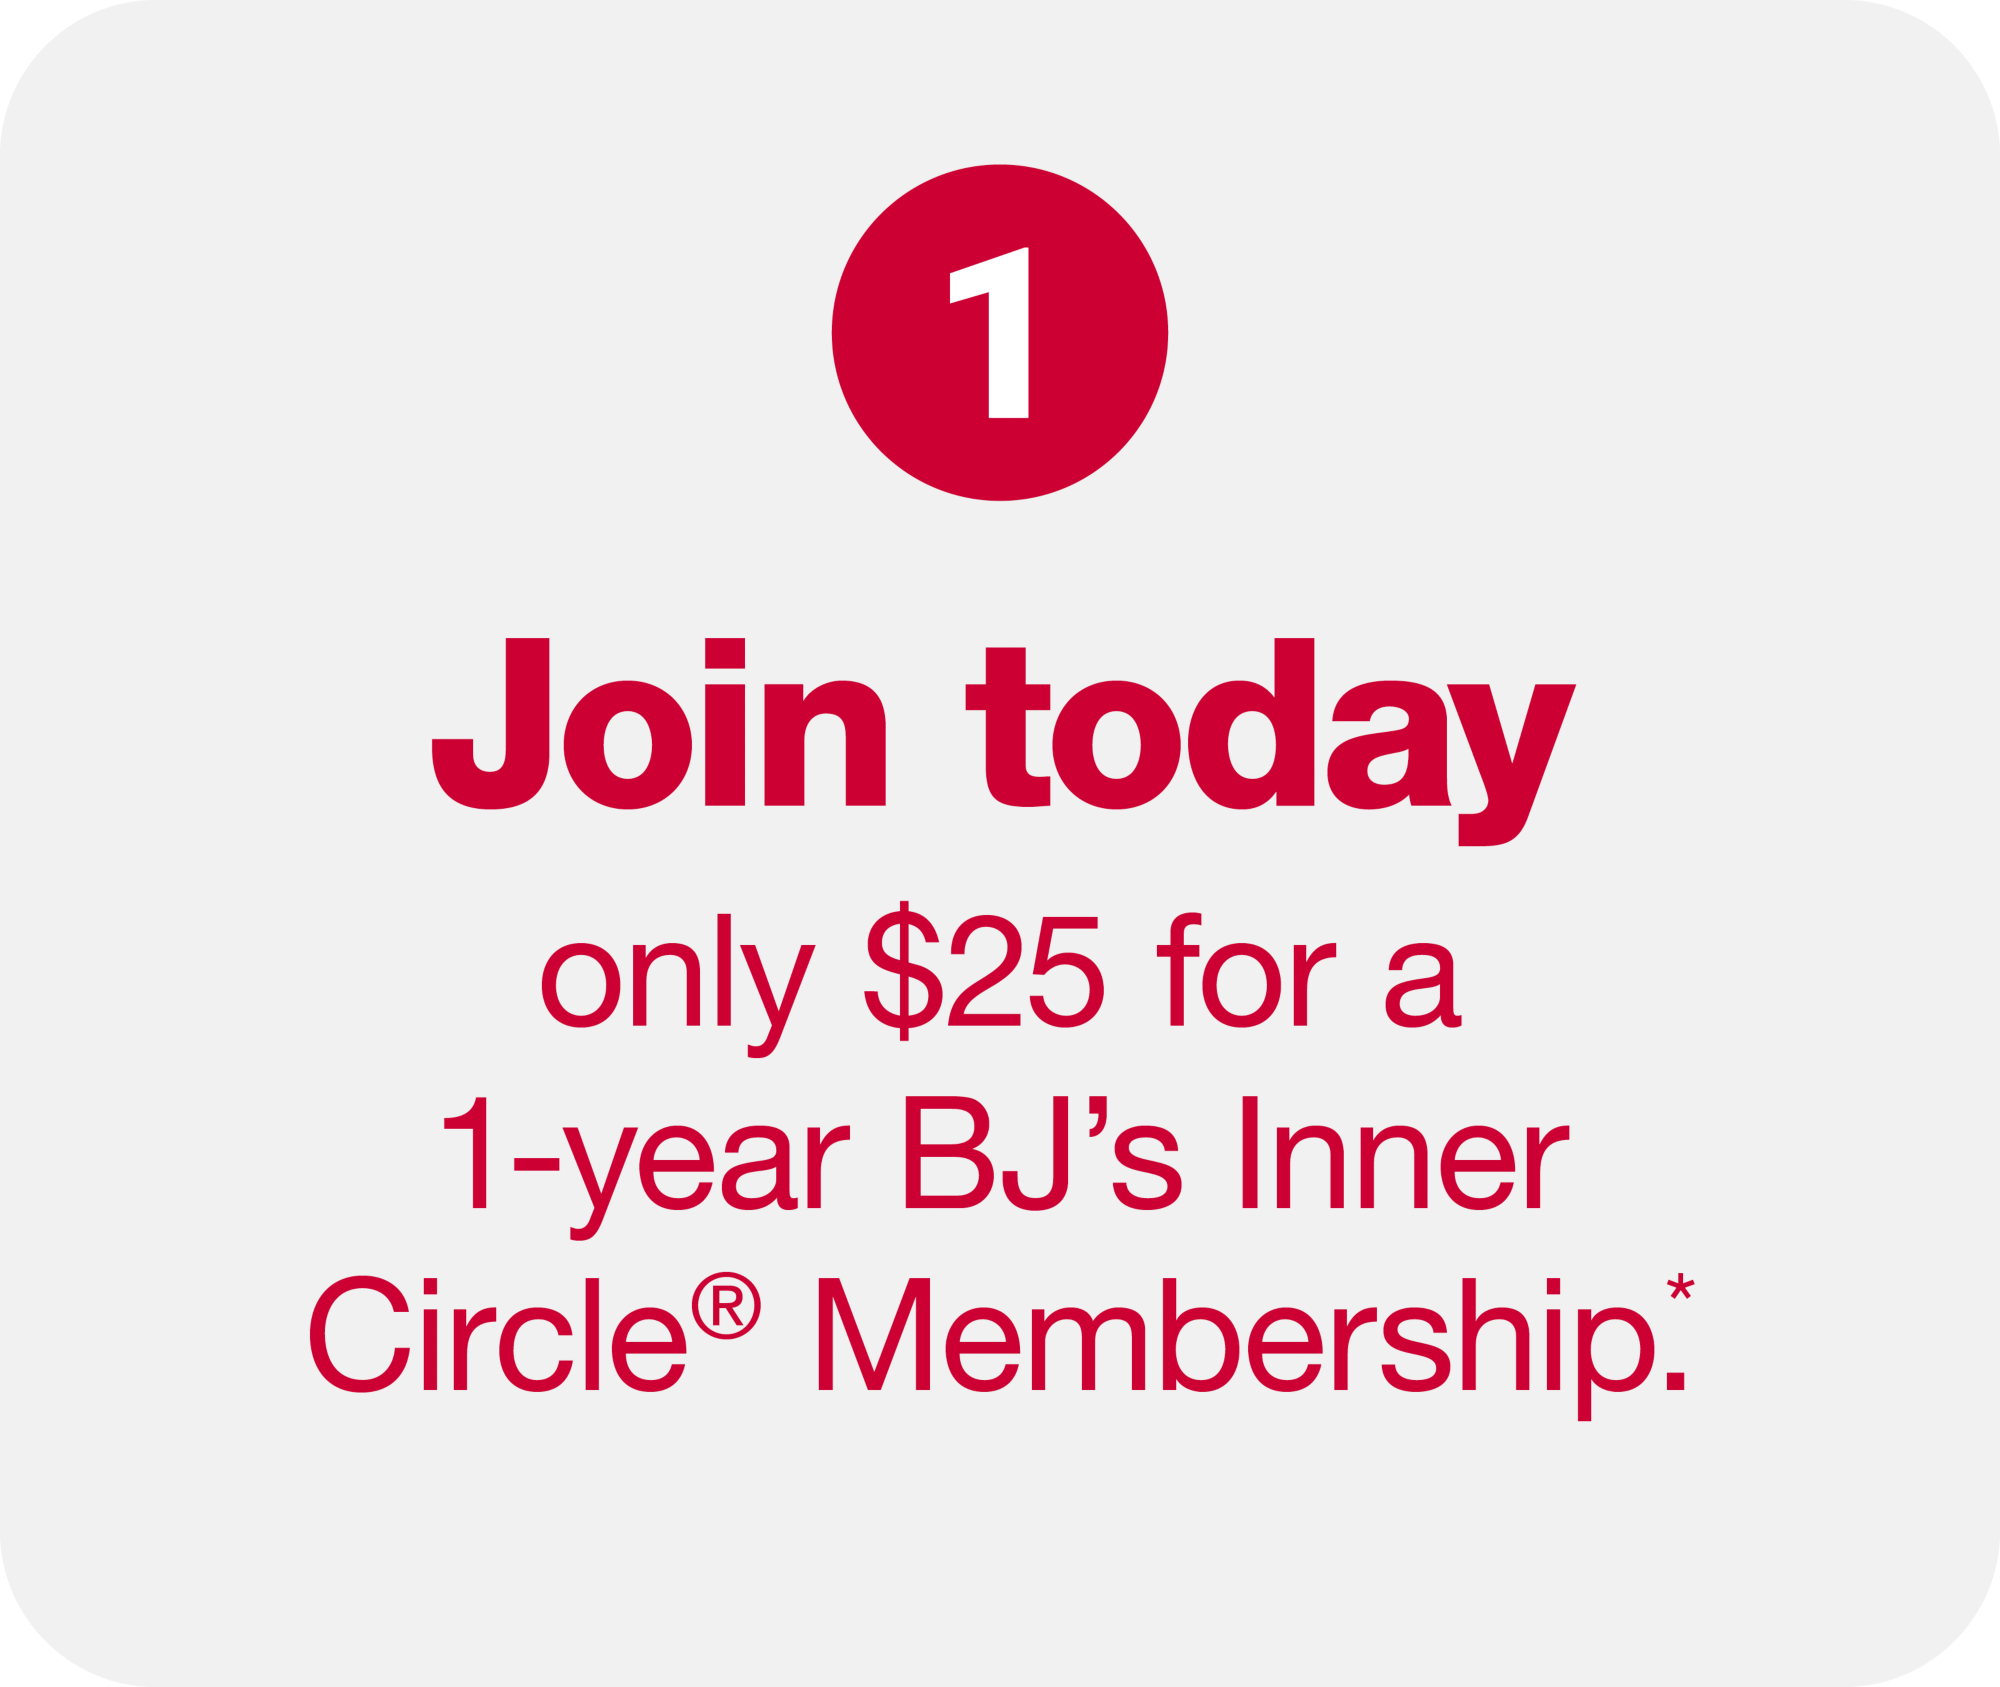 1.) Join today only $25 for a 1-year BJ's Inner Circle® Membership